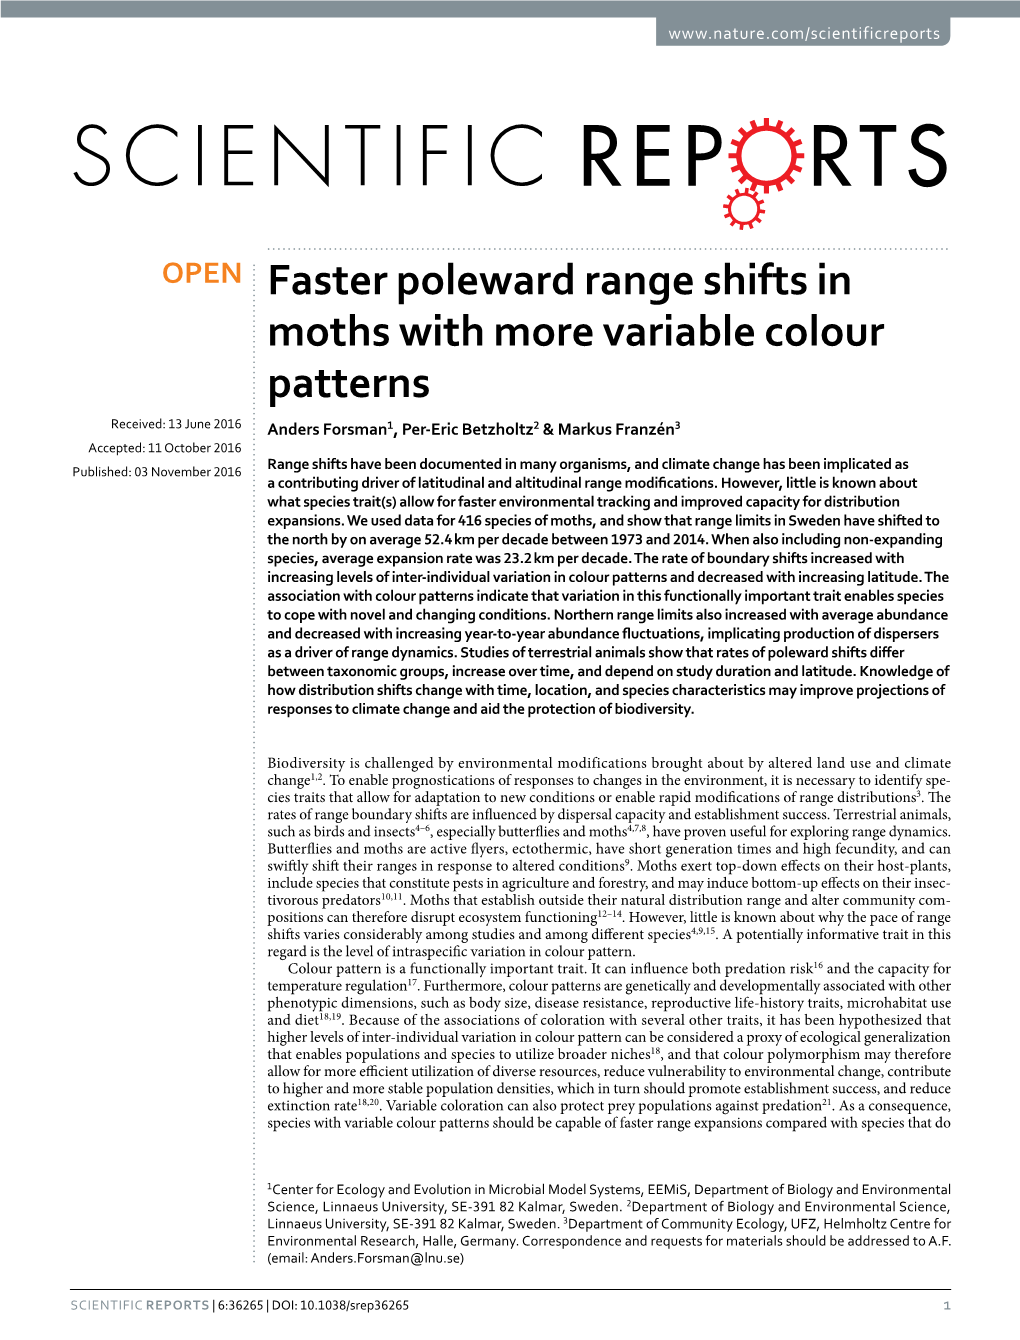 Faster Poleward Range Shifts in Moths with More Variable Colour Patterns